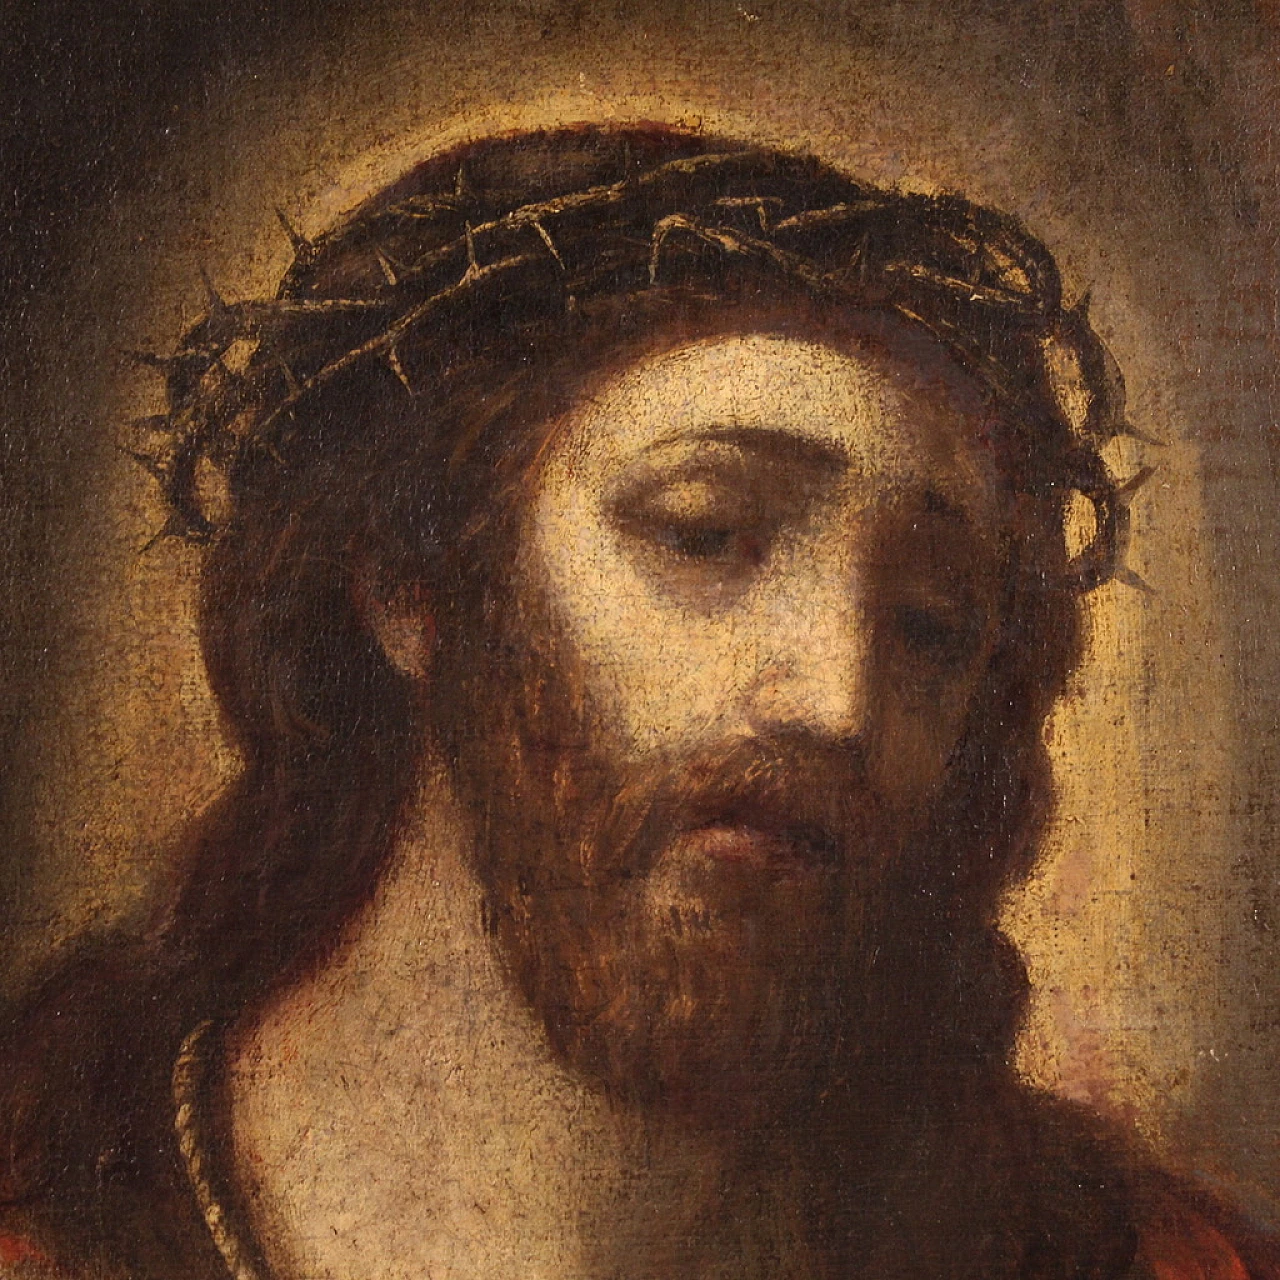 Ecce Homo painting, oil on canvas, 17th century 11